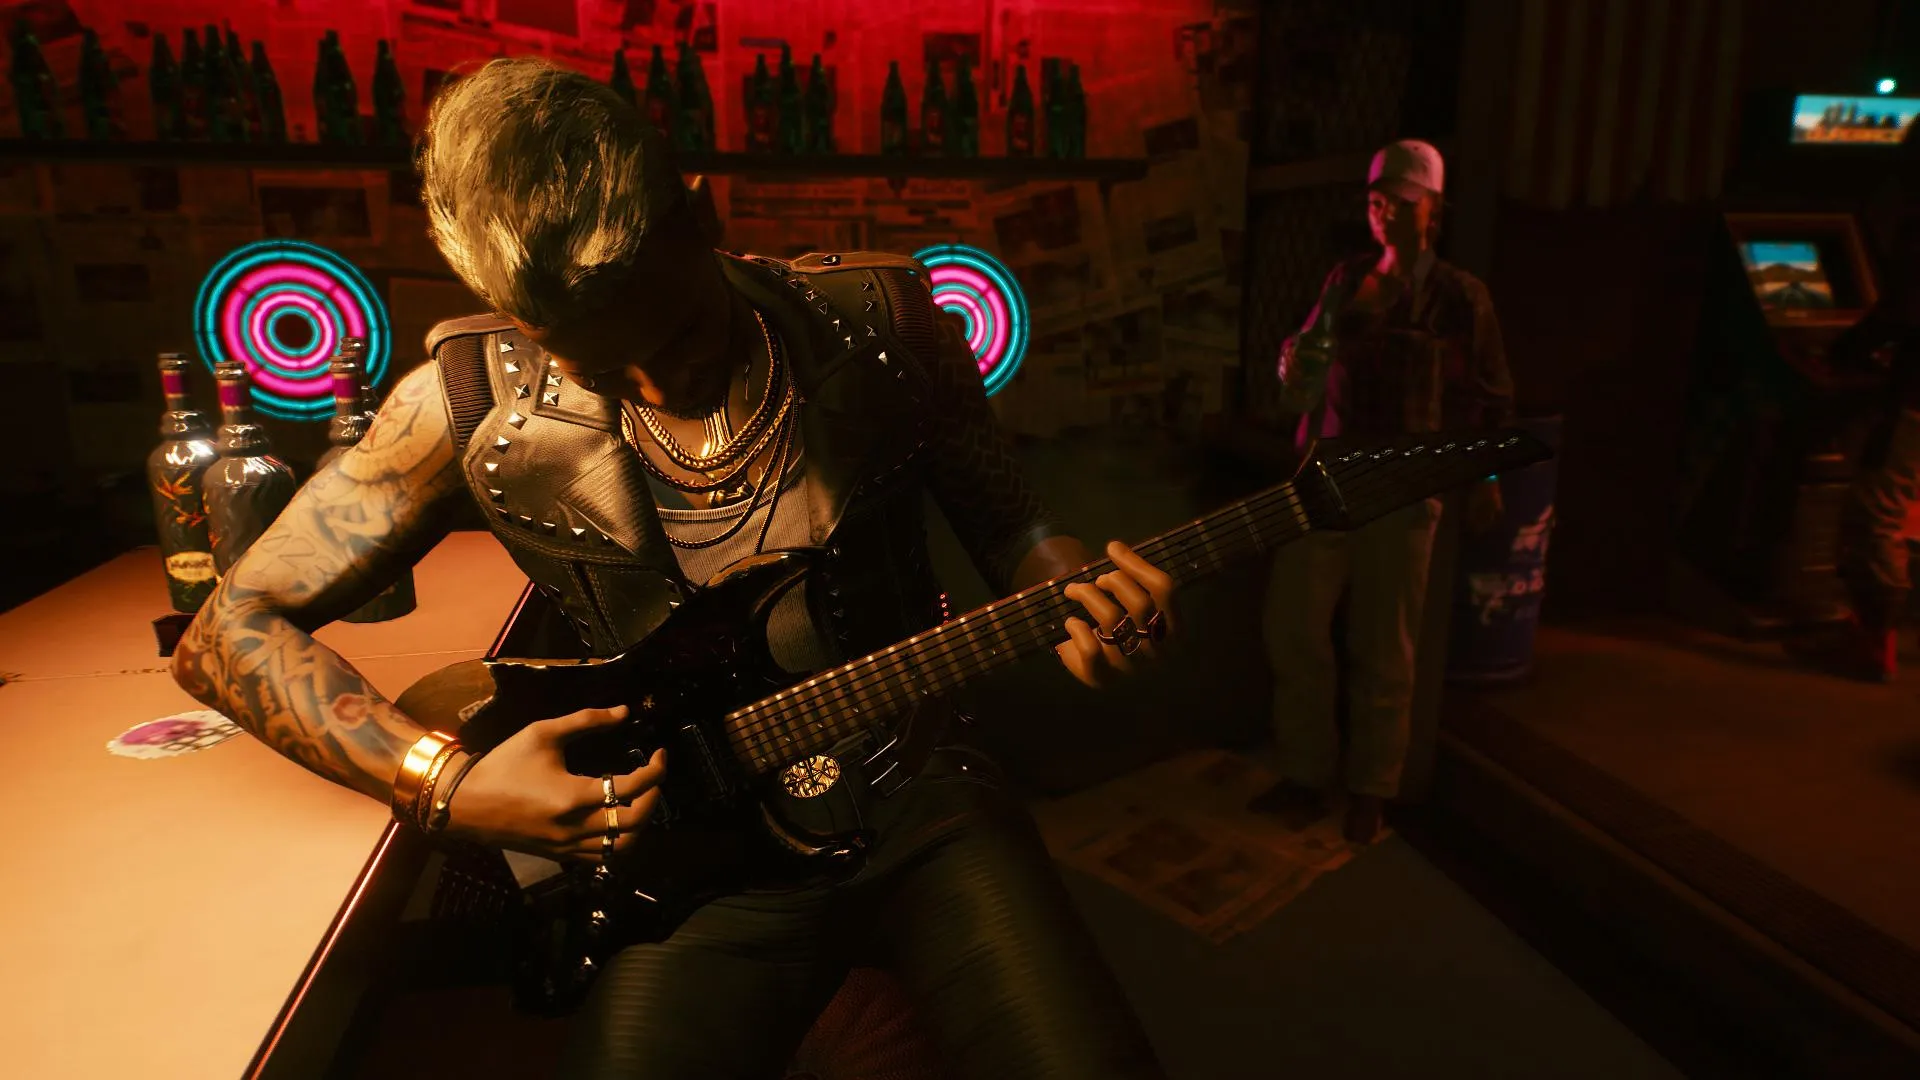 cyberpunk 2077 a like supreme side job kerry jamming with johnnys guitar